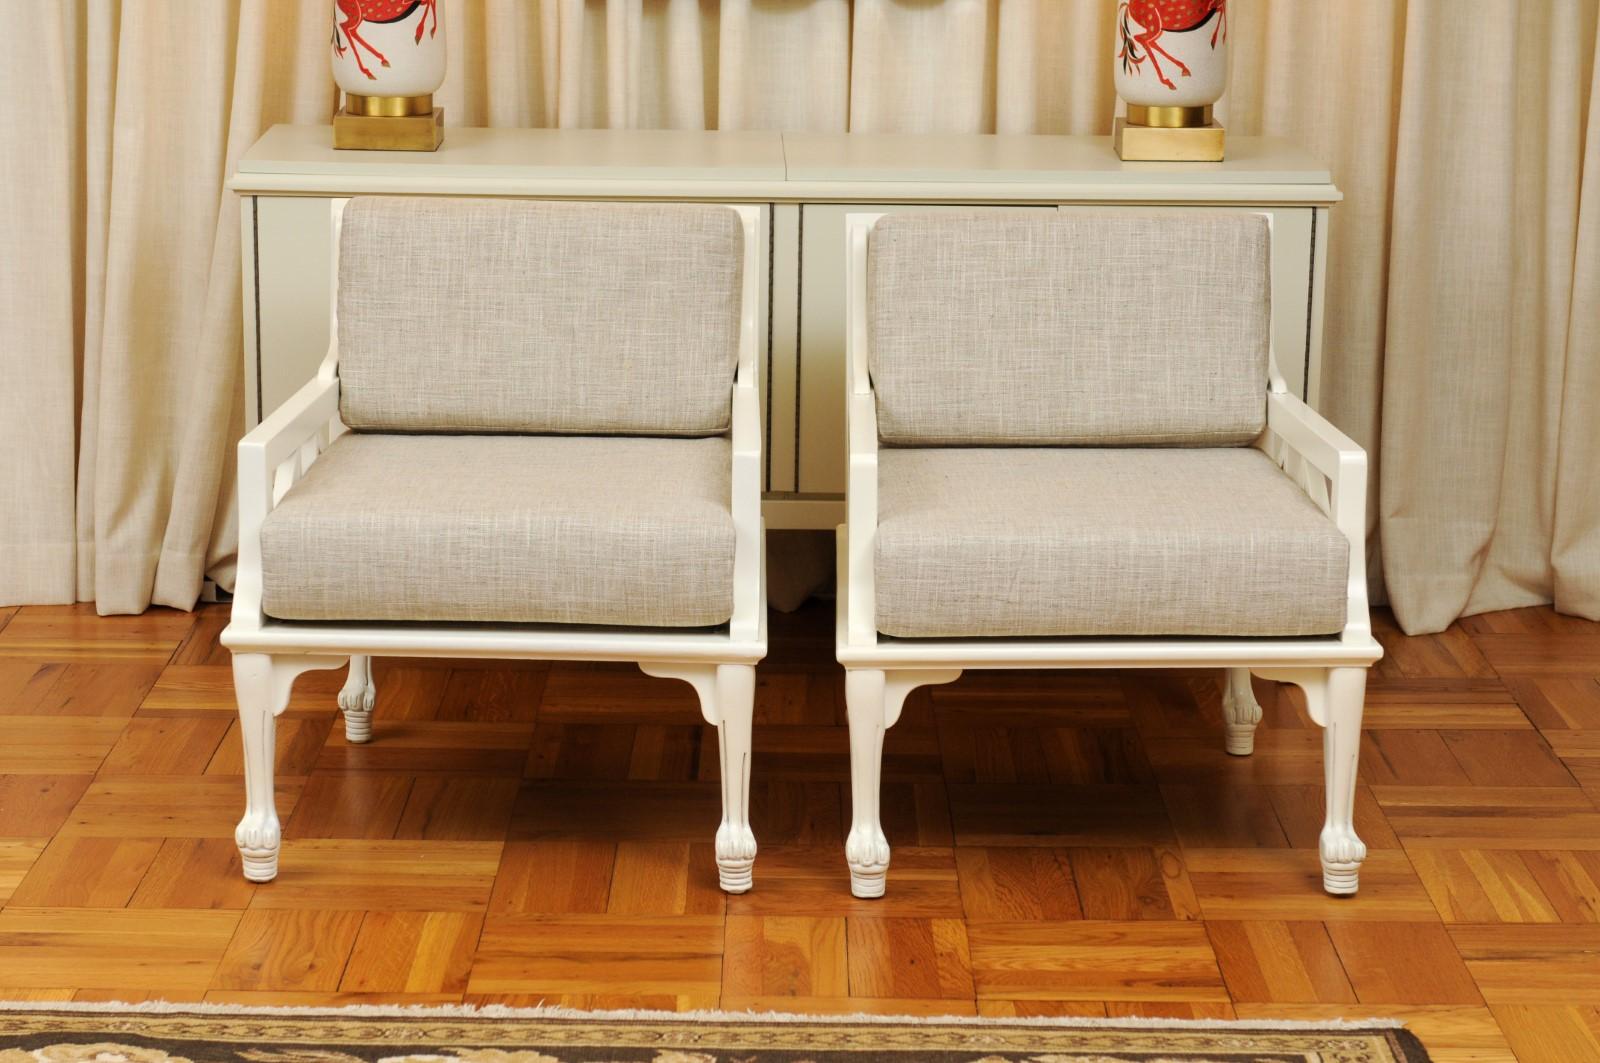 American Majestic Pair of Thebes Loungers by John Hutton for Randolph & Hein, circa 1975 For Sale